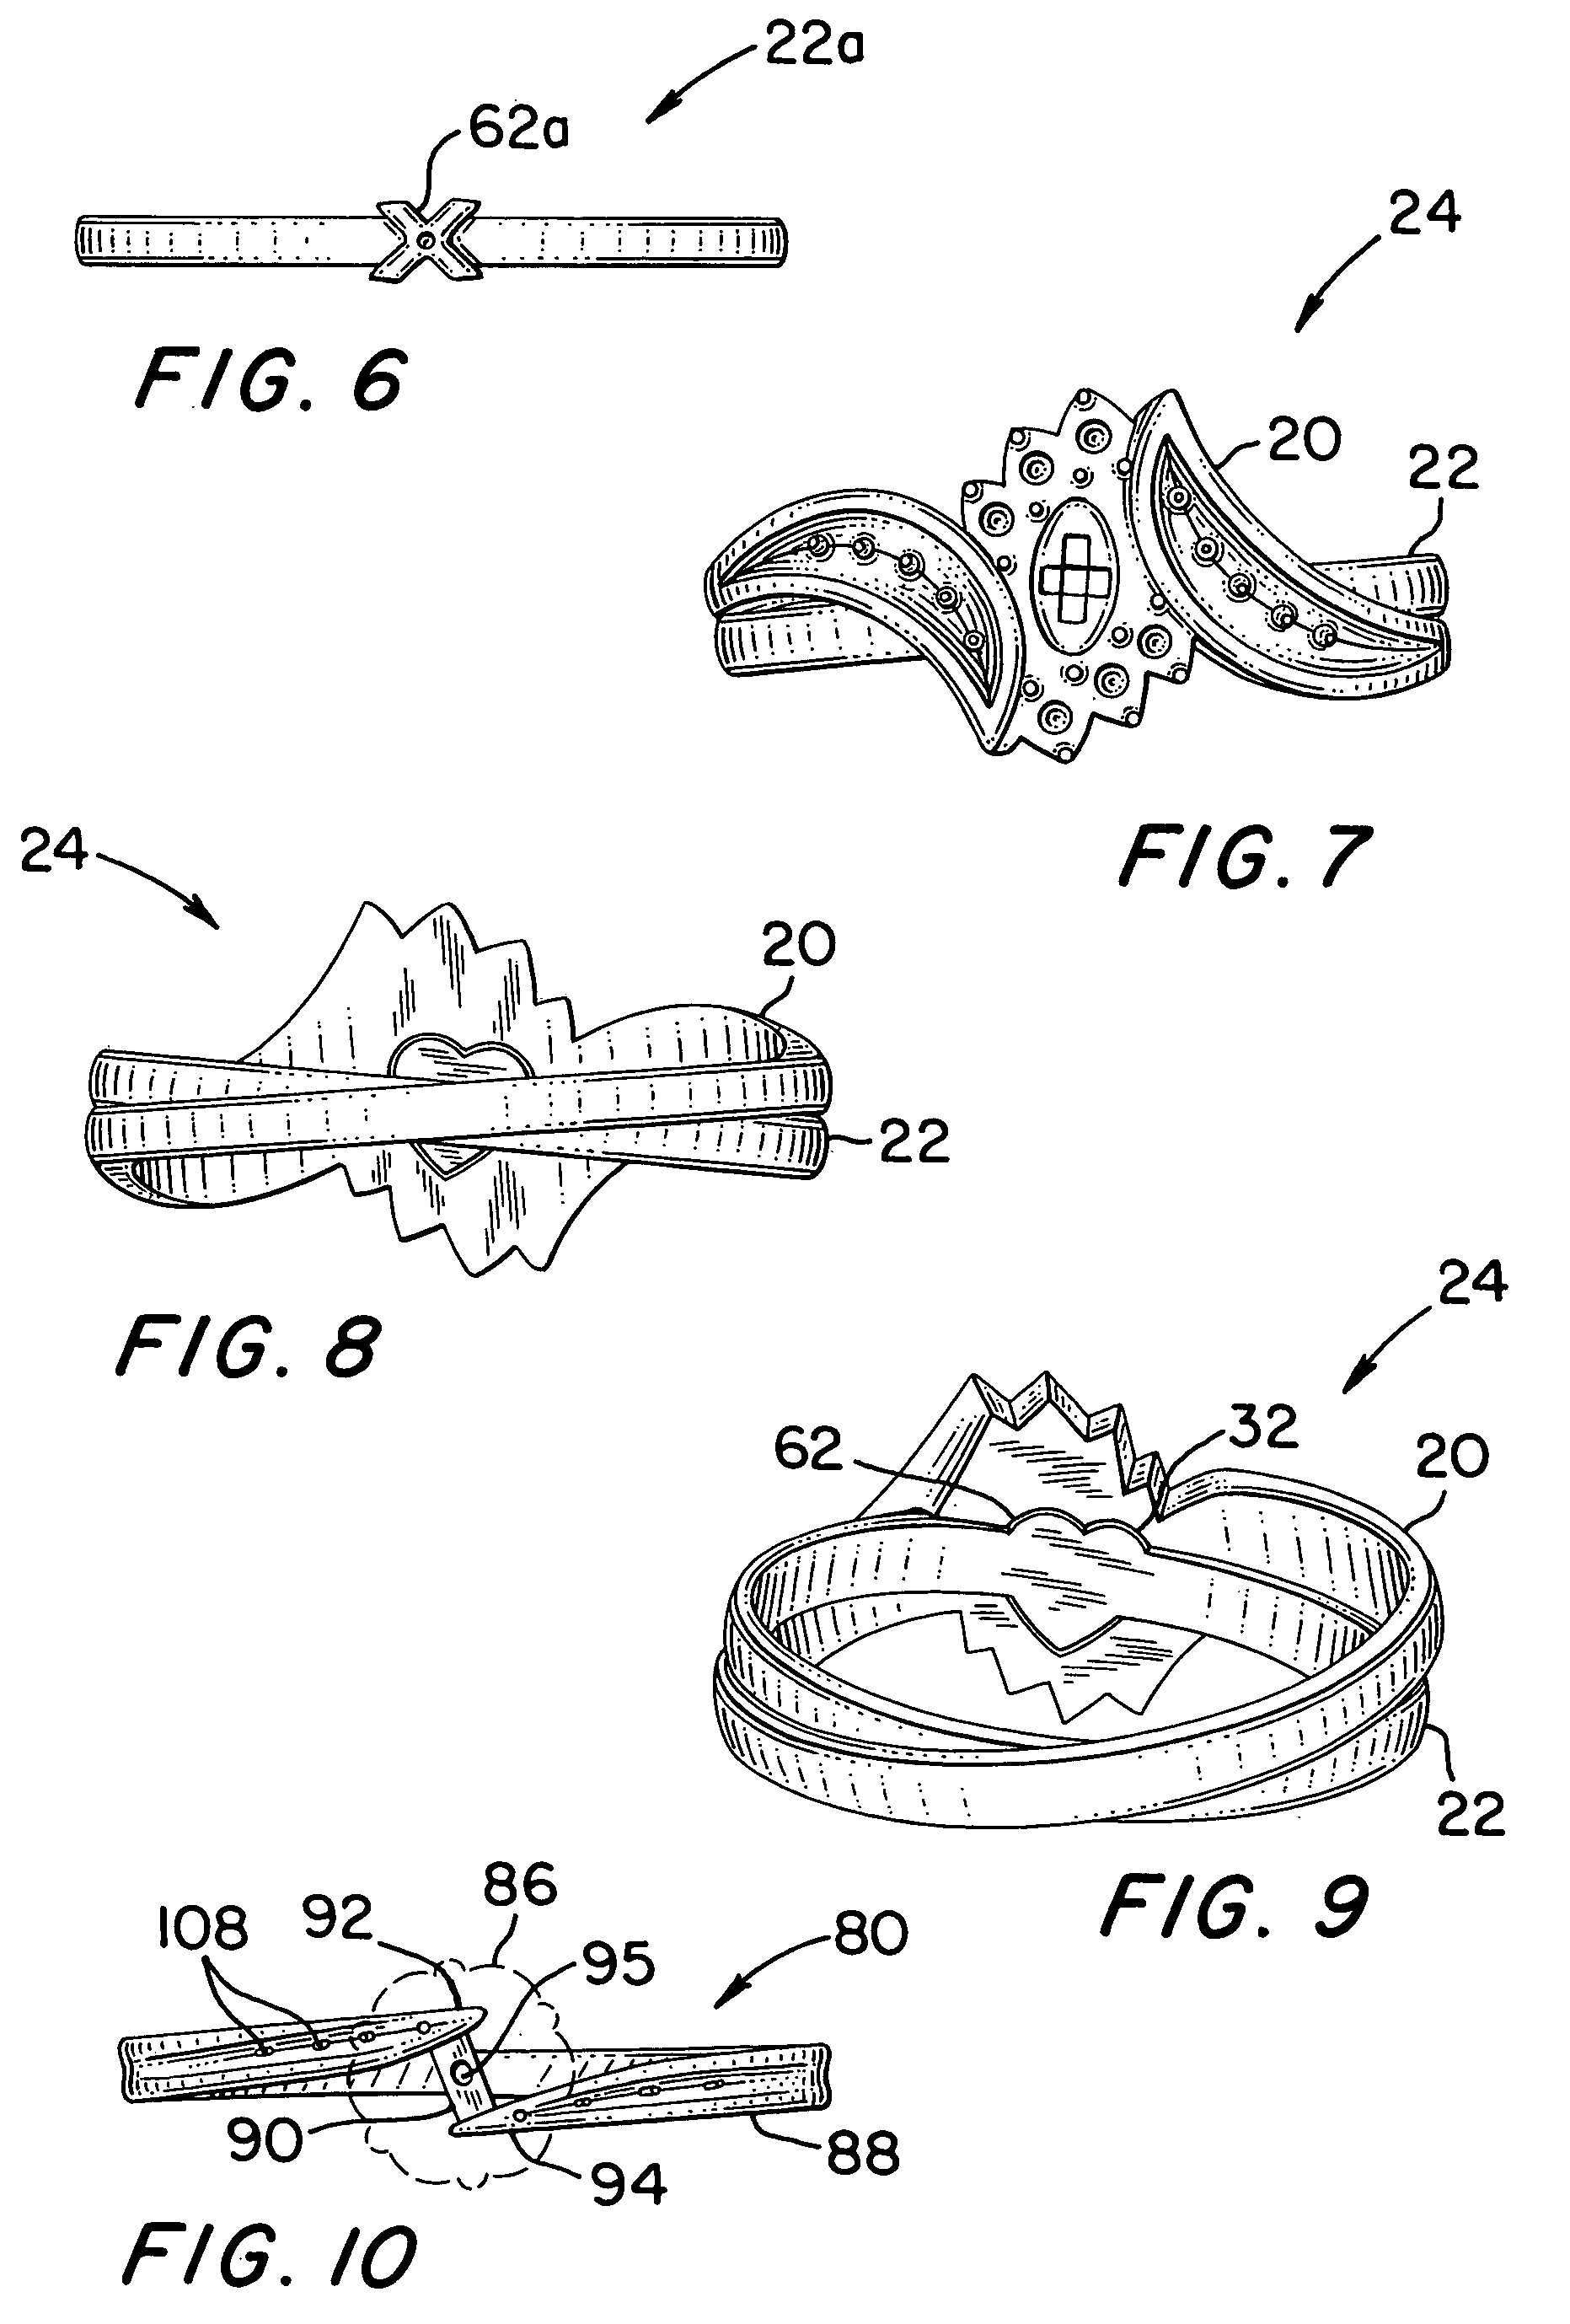 Engagement set with locking arrangement and rear crossover configuration